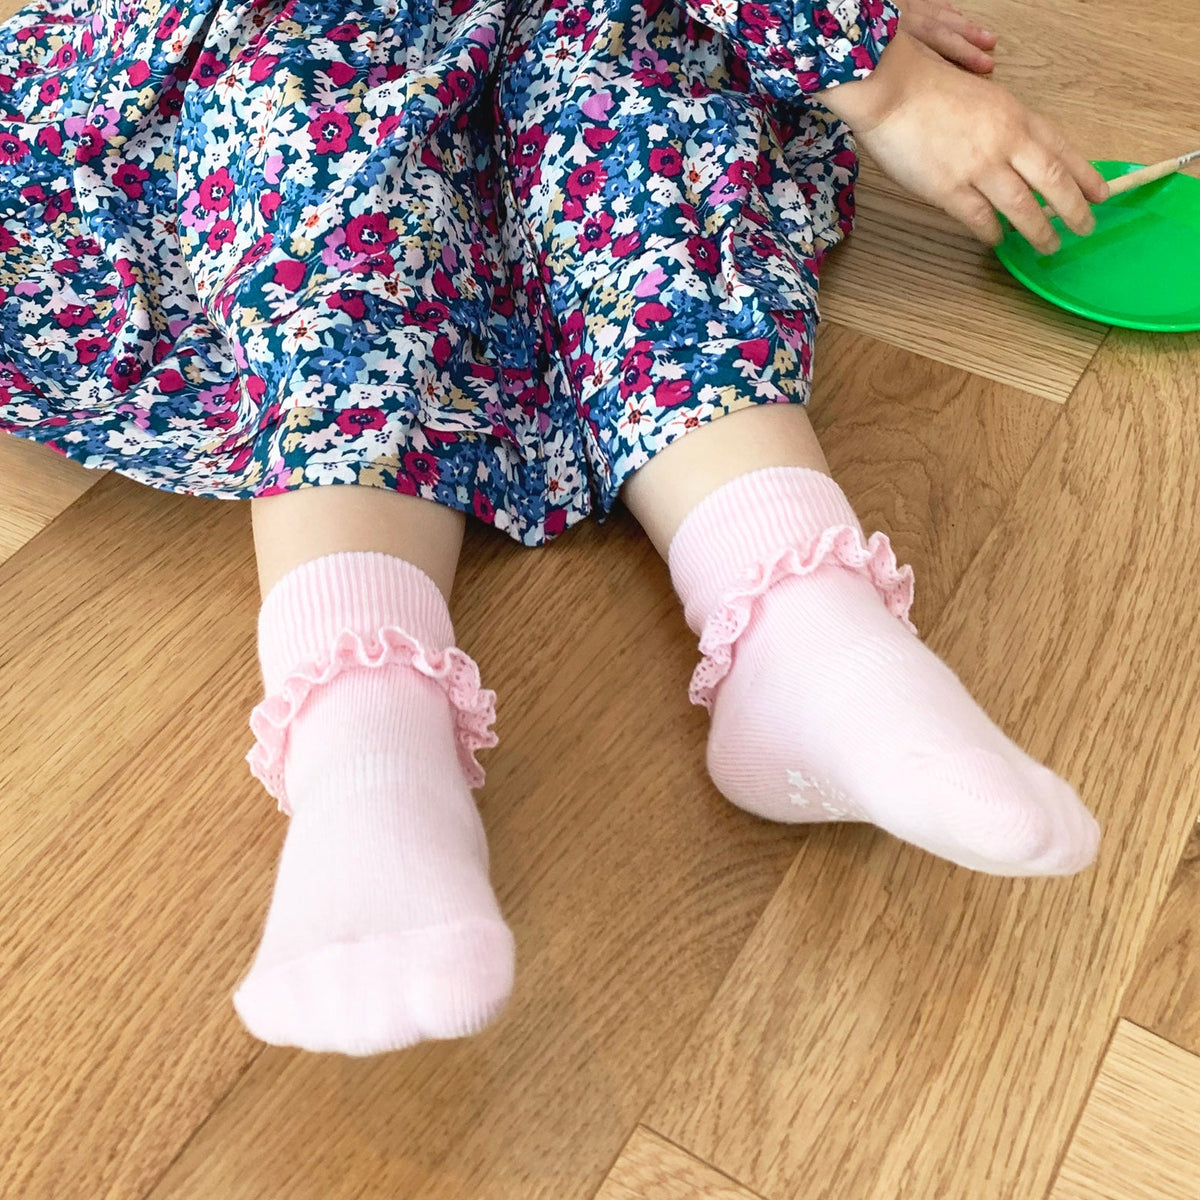 Frilly Non-Slip Stay-On Baby and Toddler Socks - 3 Pack in Pink Lemonade